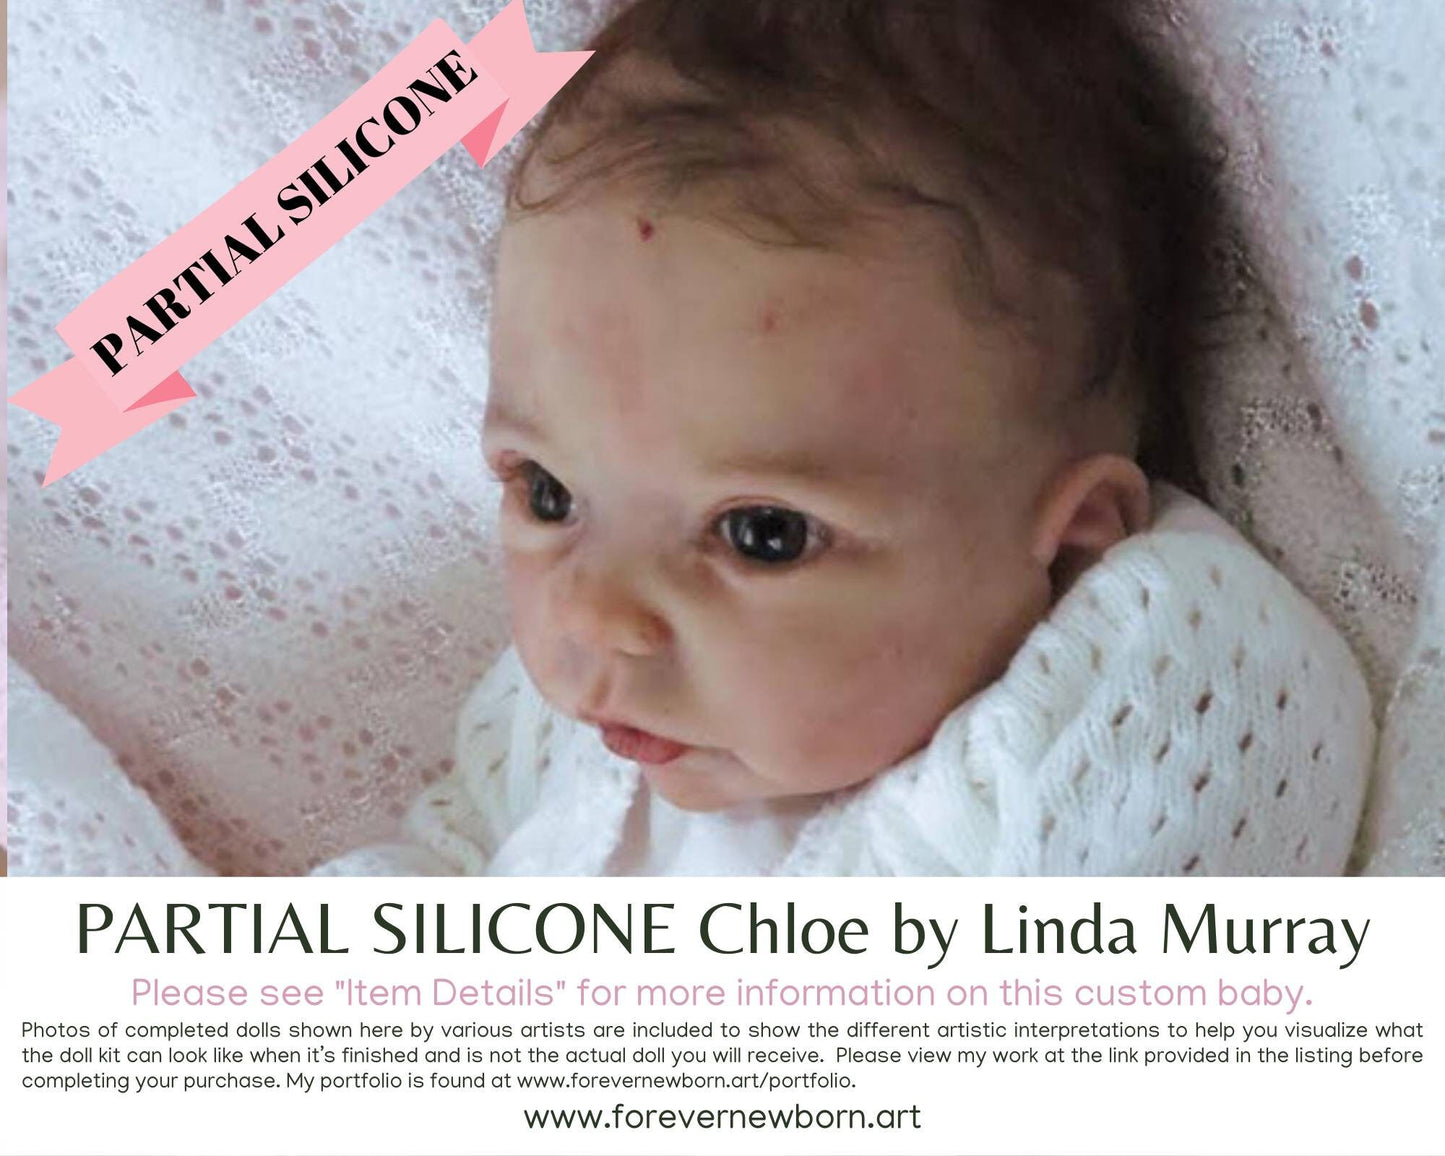 SiLiCoNe BaBy Chloe by Linda Murray (19"+ Full Limbs) with cloth body. Extended Processing Time May Be Required. ASK FIRST!